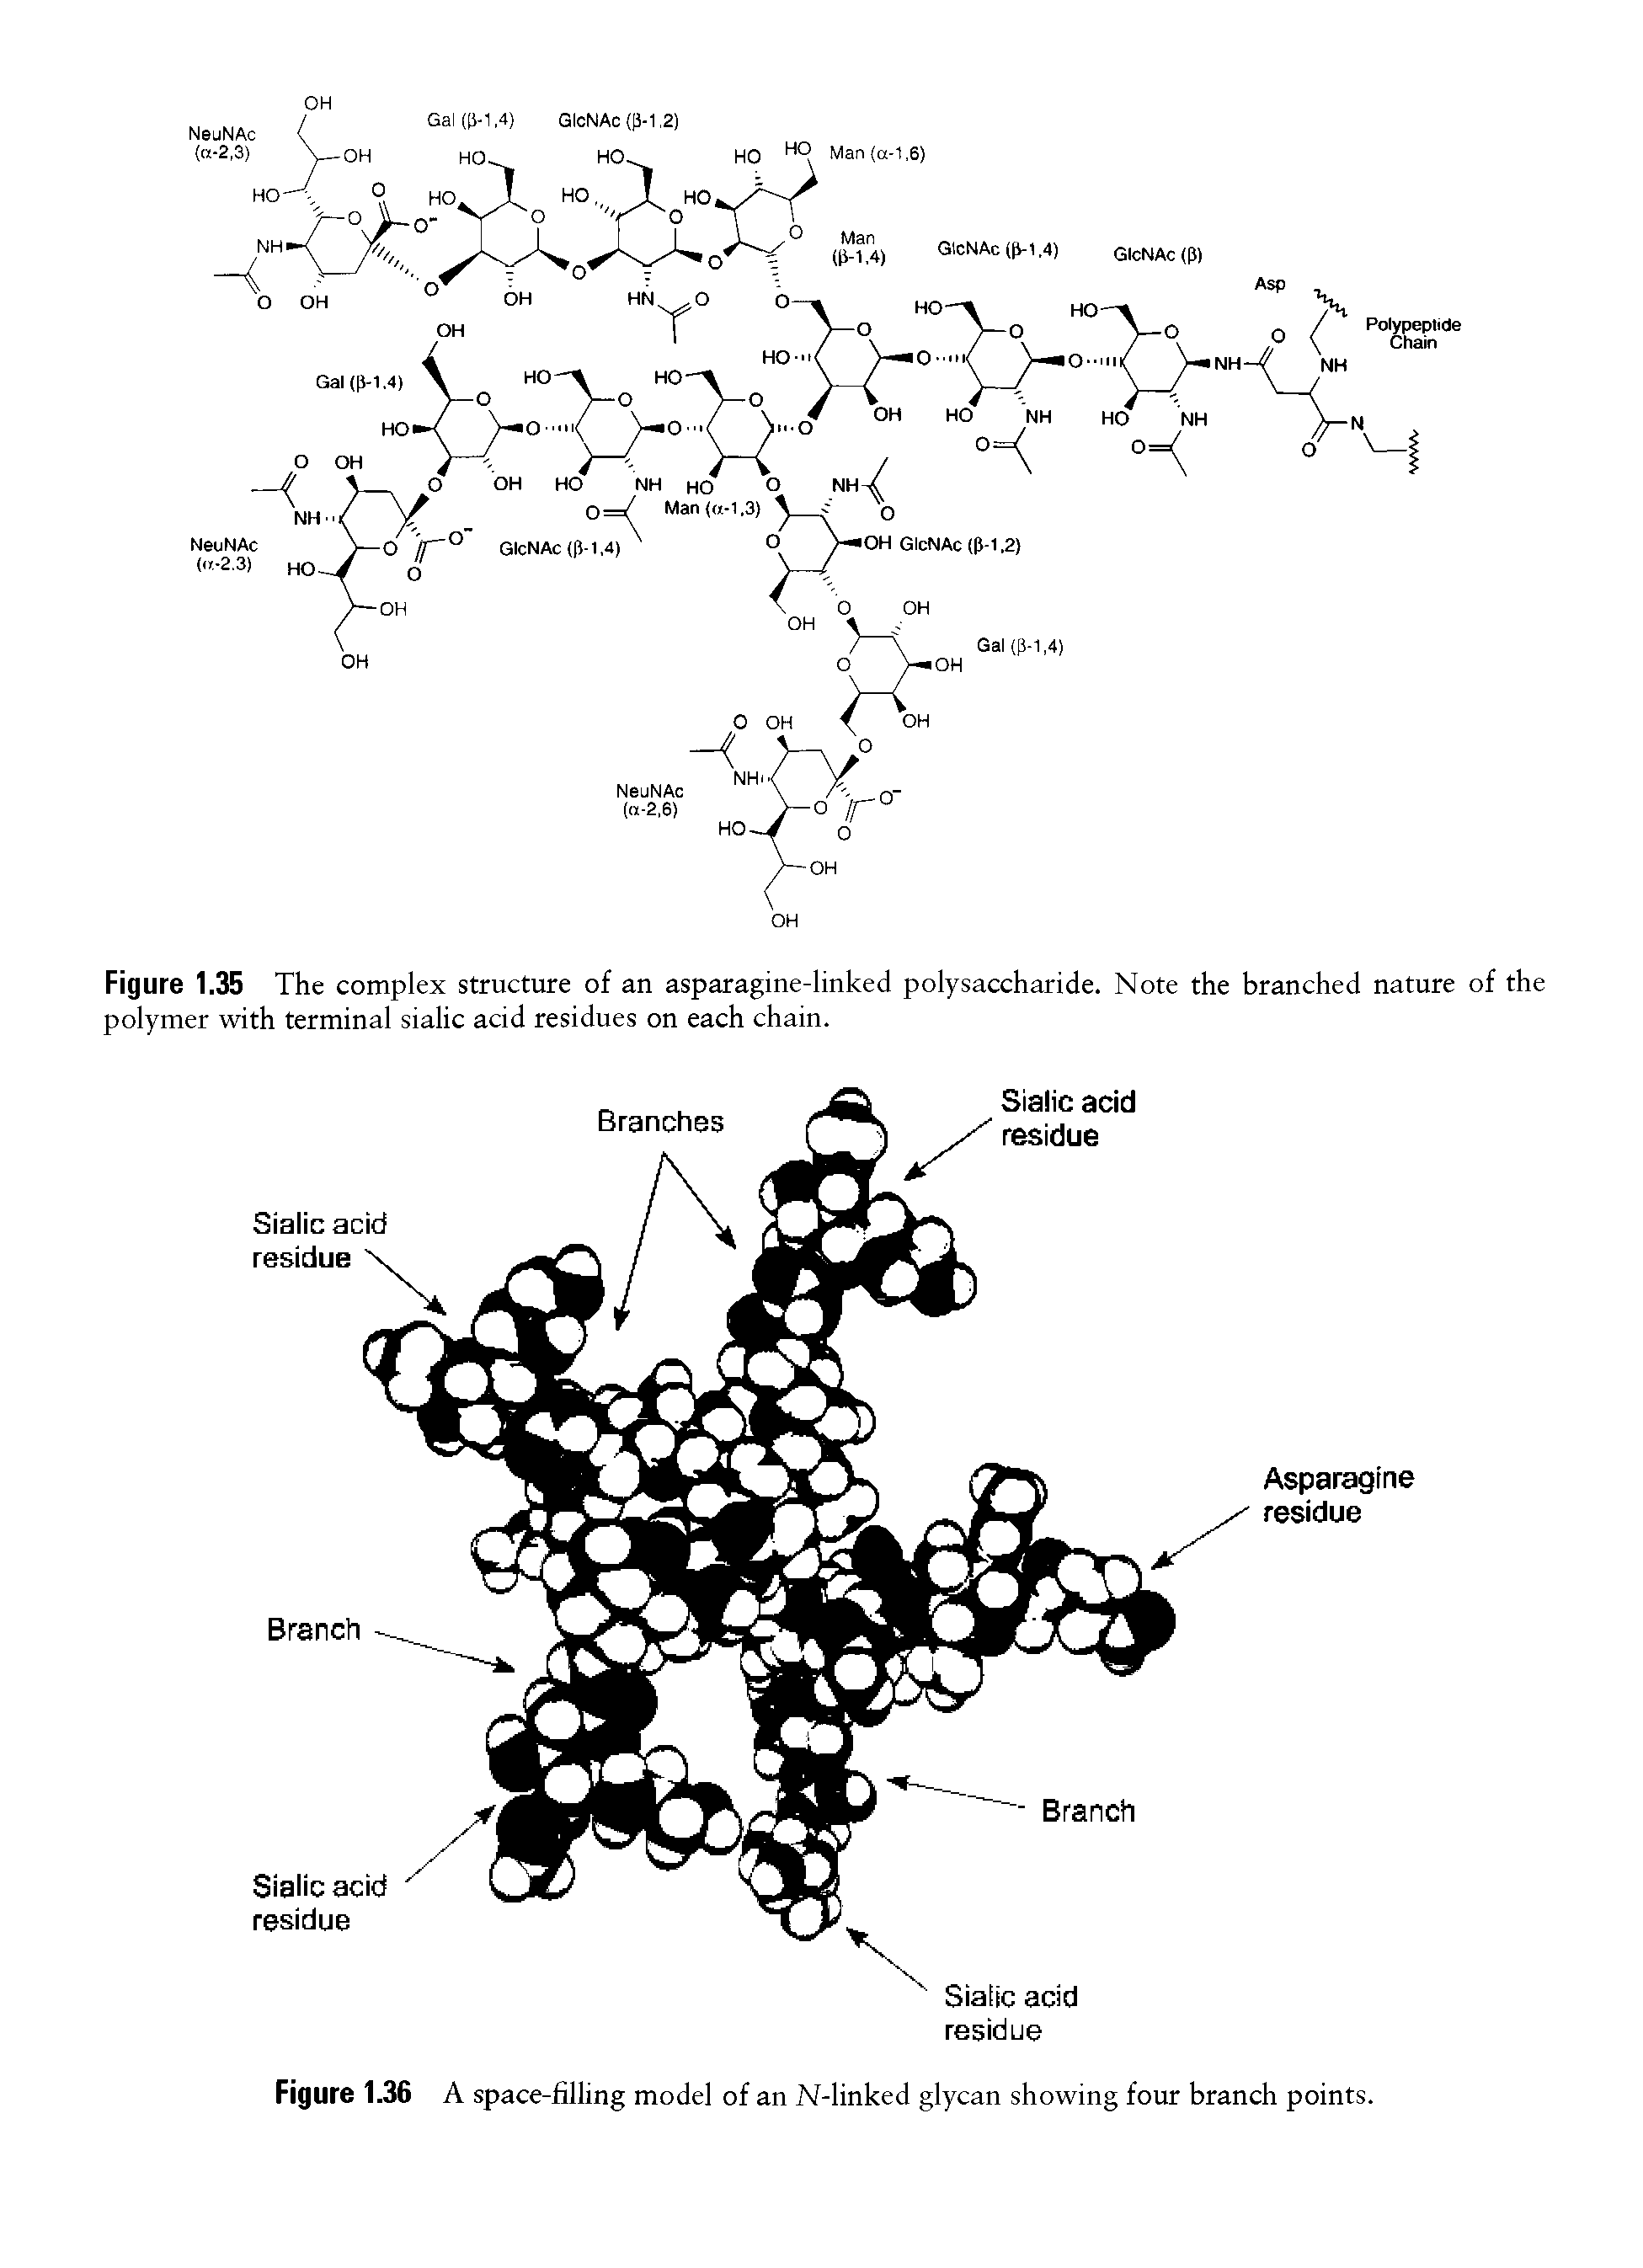 Figure 1.36 A space-filling model of an N-linked glycan showing four branch points.